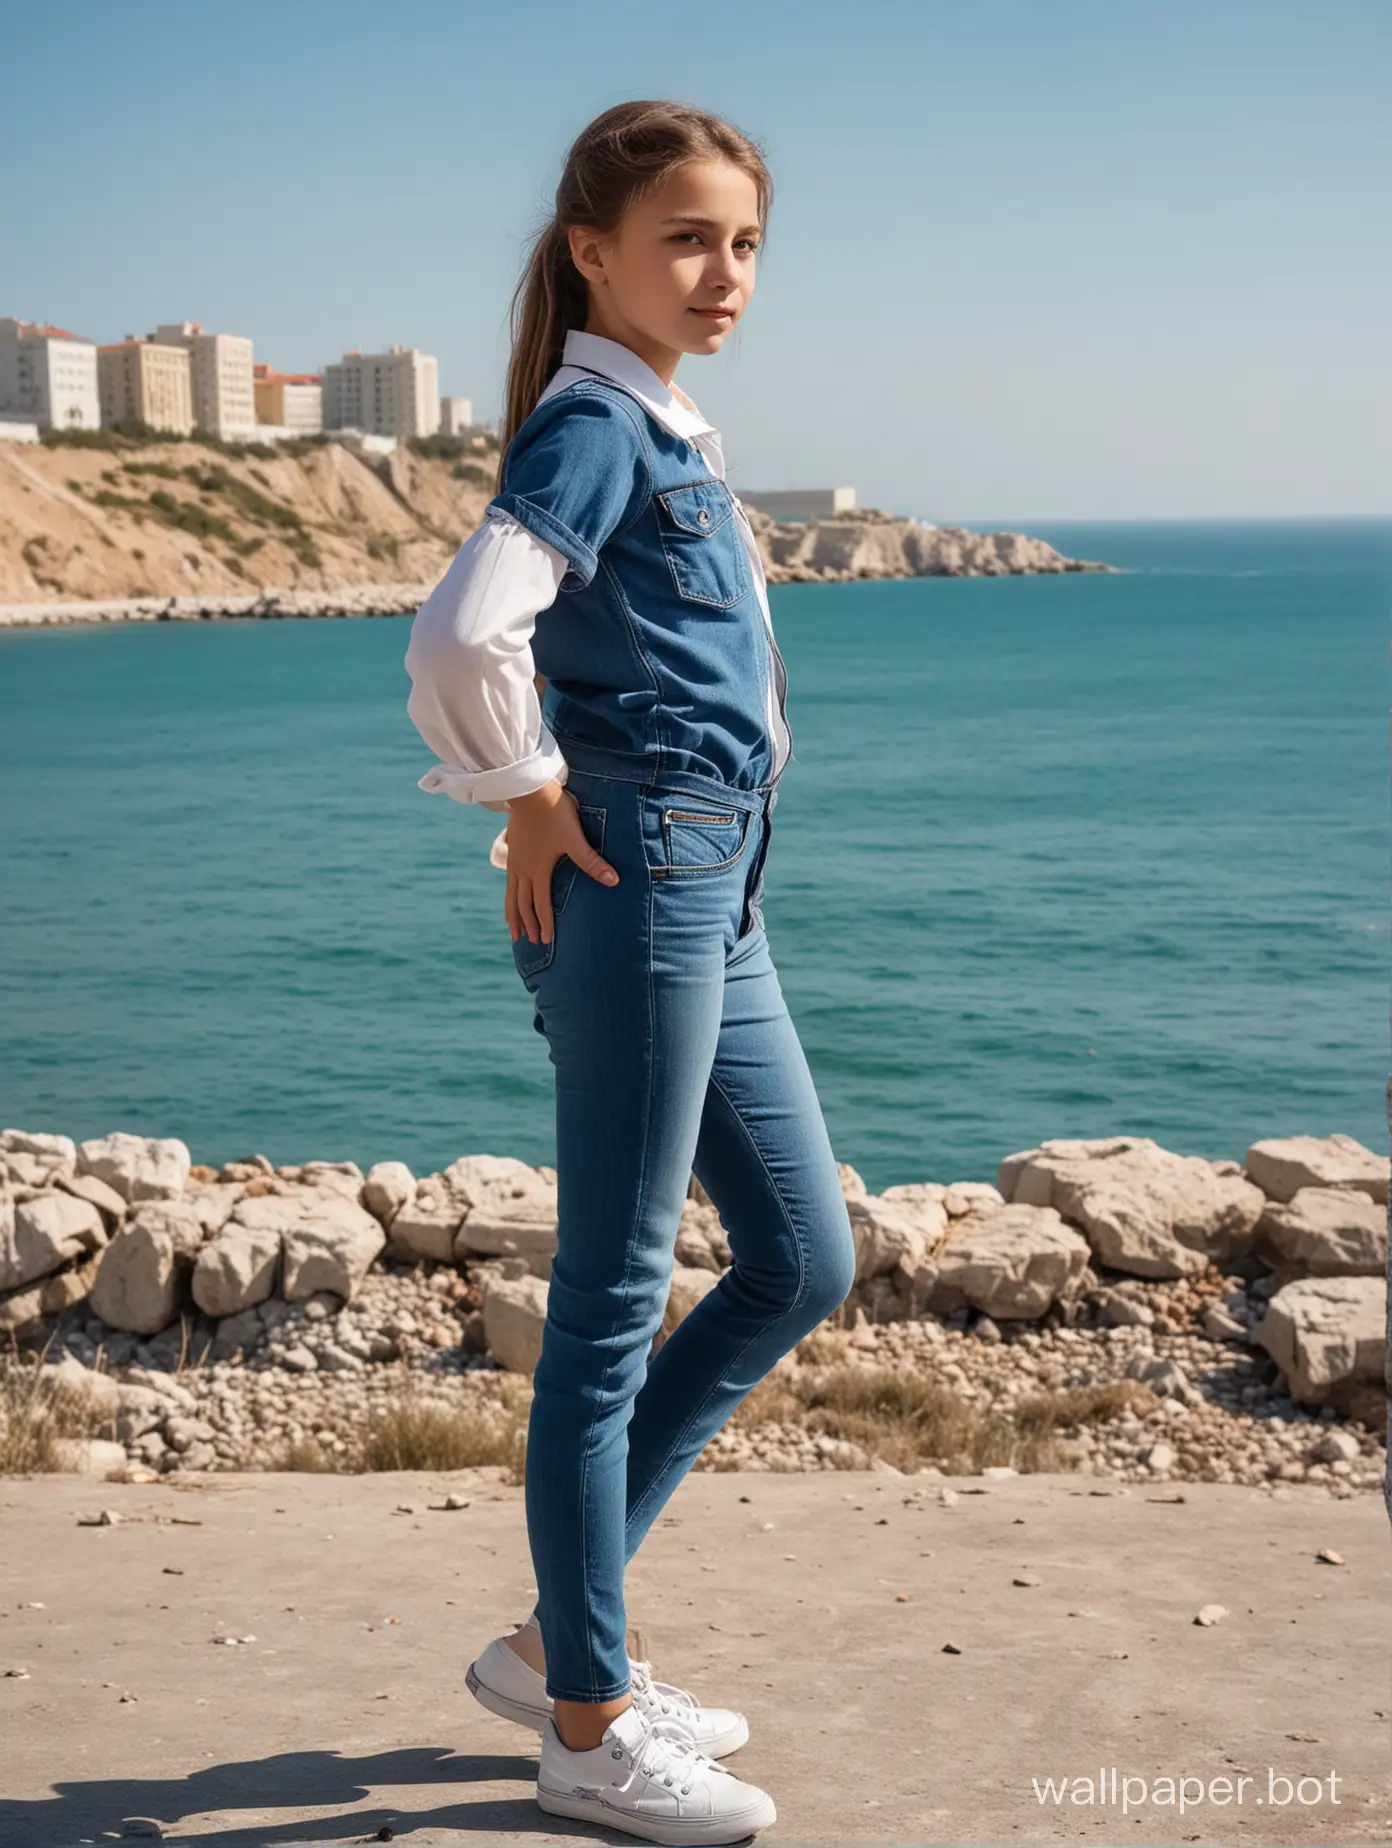 Beautiful Soviet schoolgirl 10 years old in Crimea against the background of the sea, full height, dynamic poses, people and buildings in the background, tight jeans, ass, back view